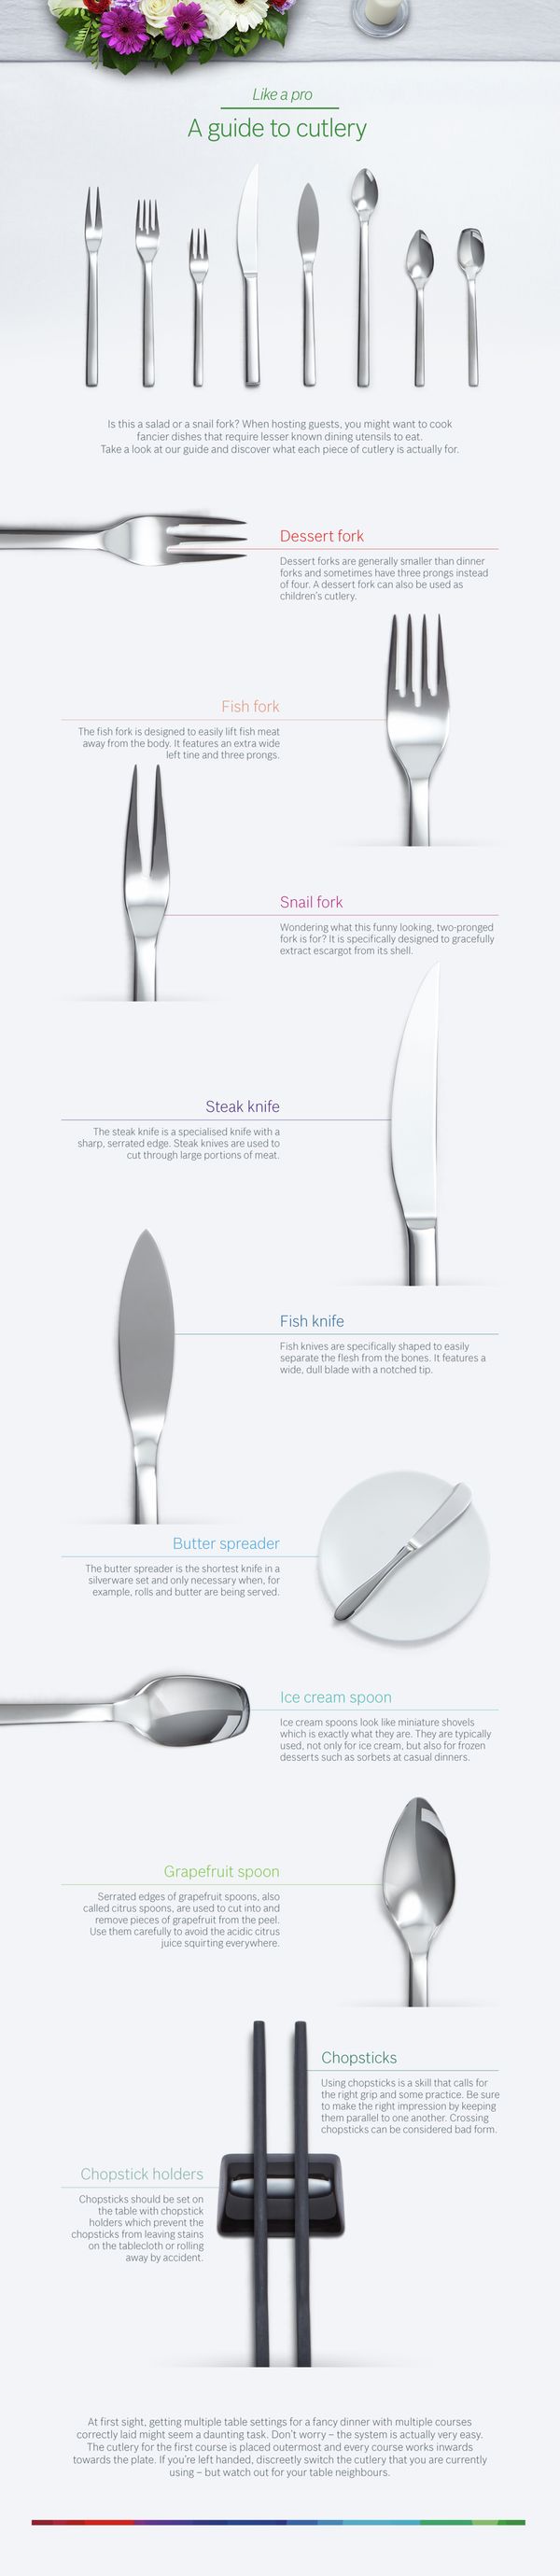 A guide to cutlery